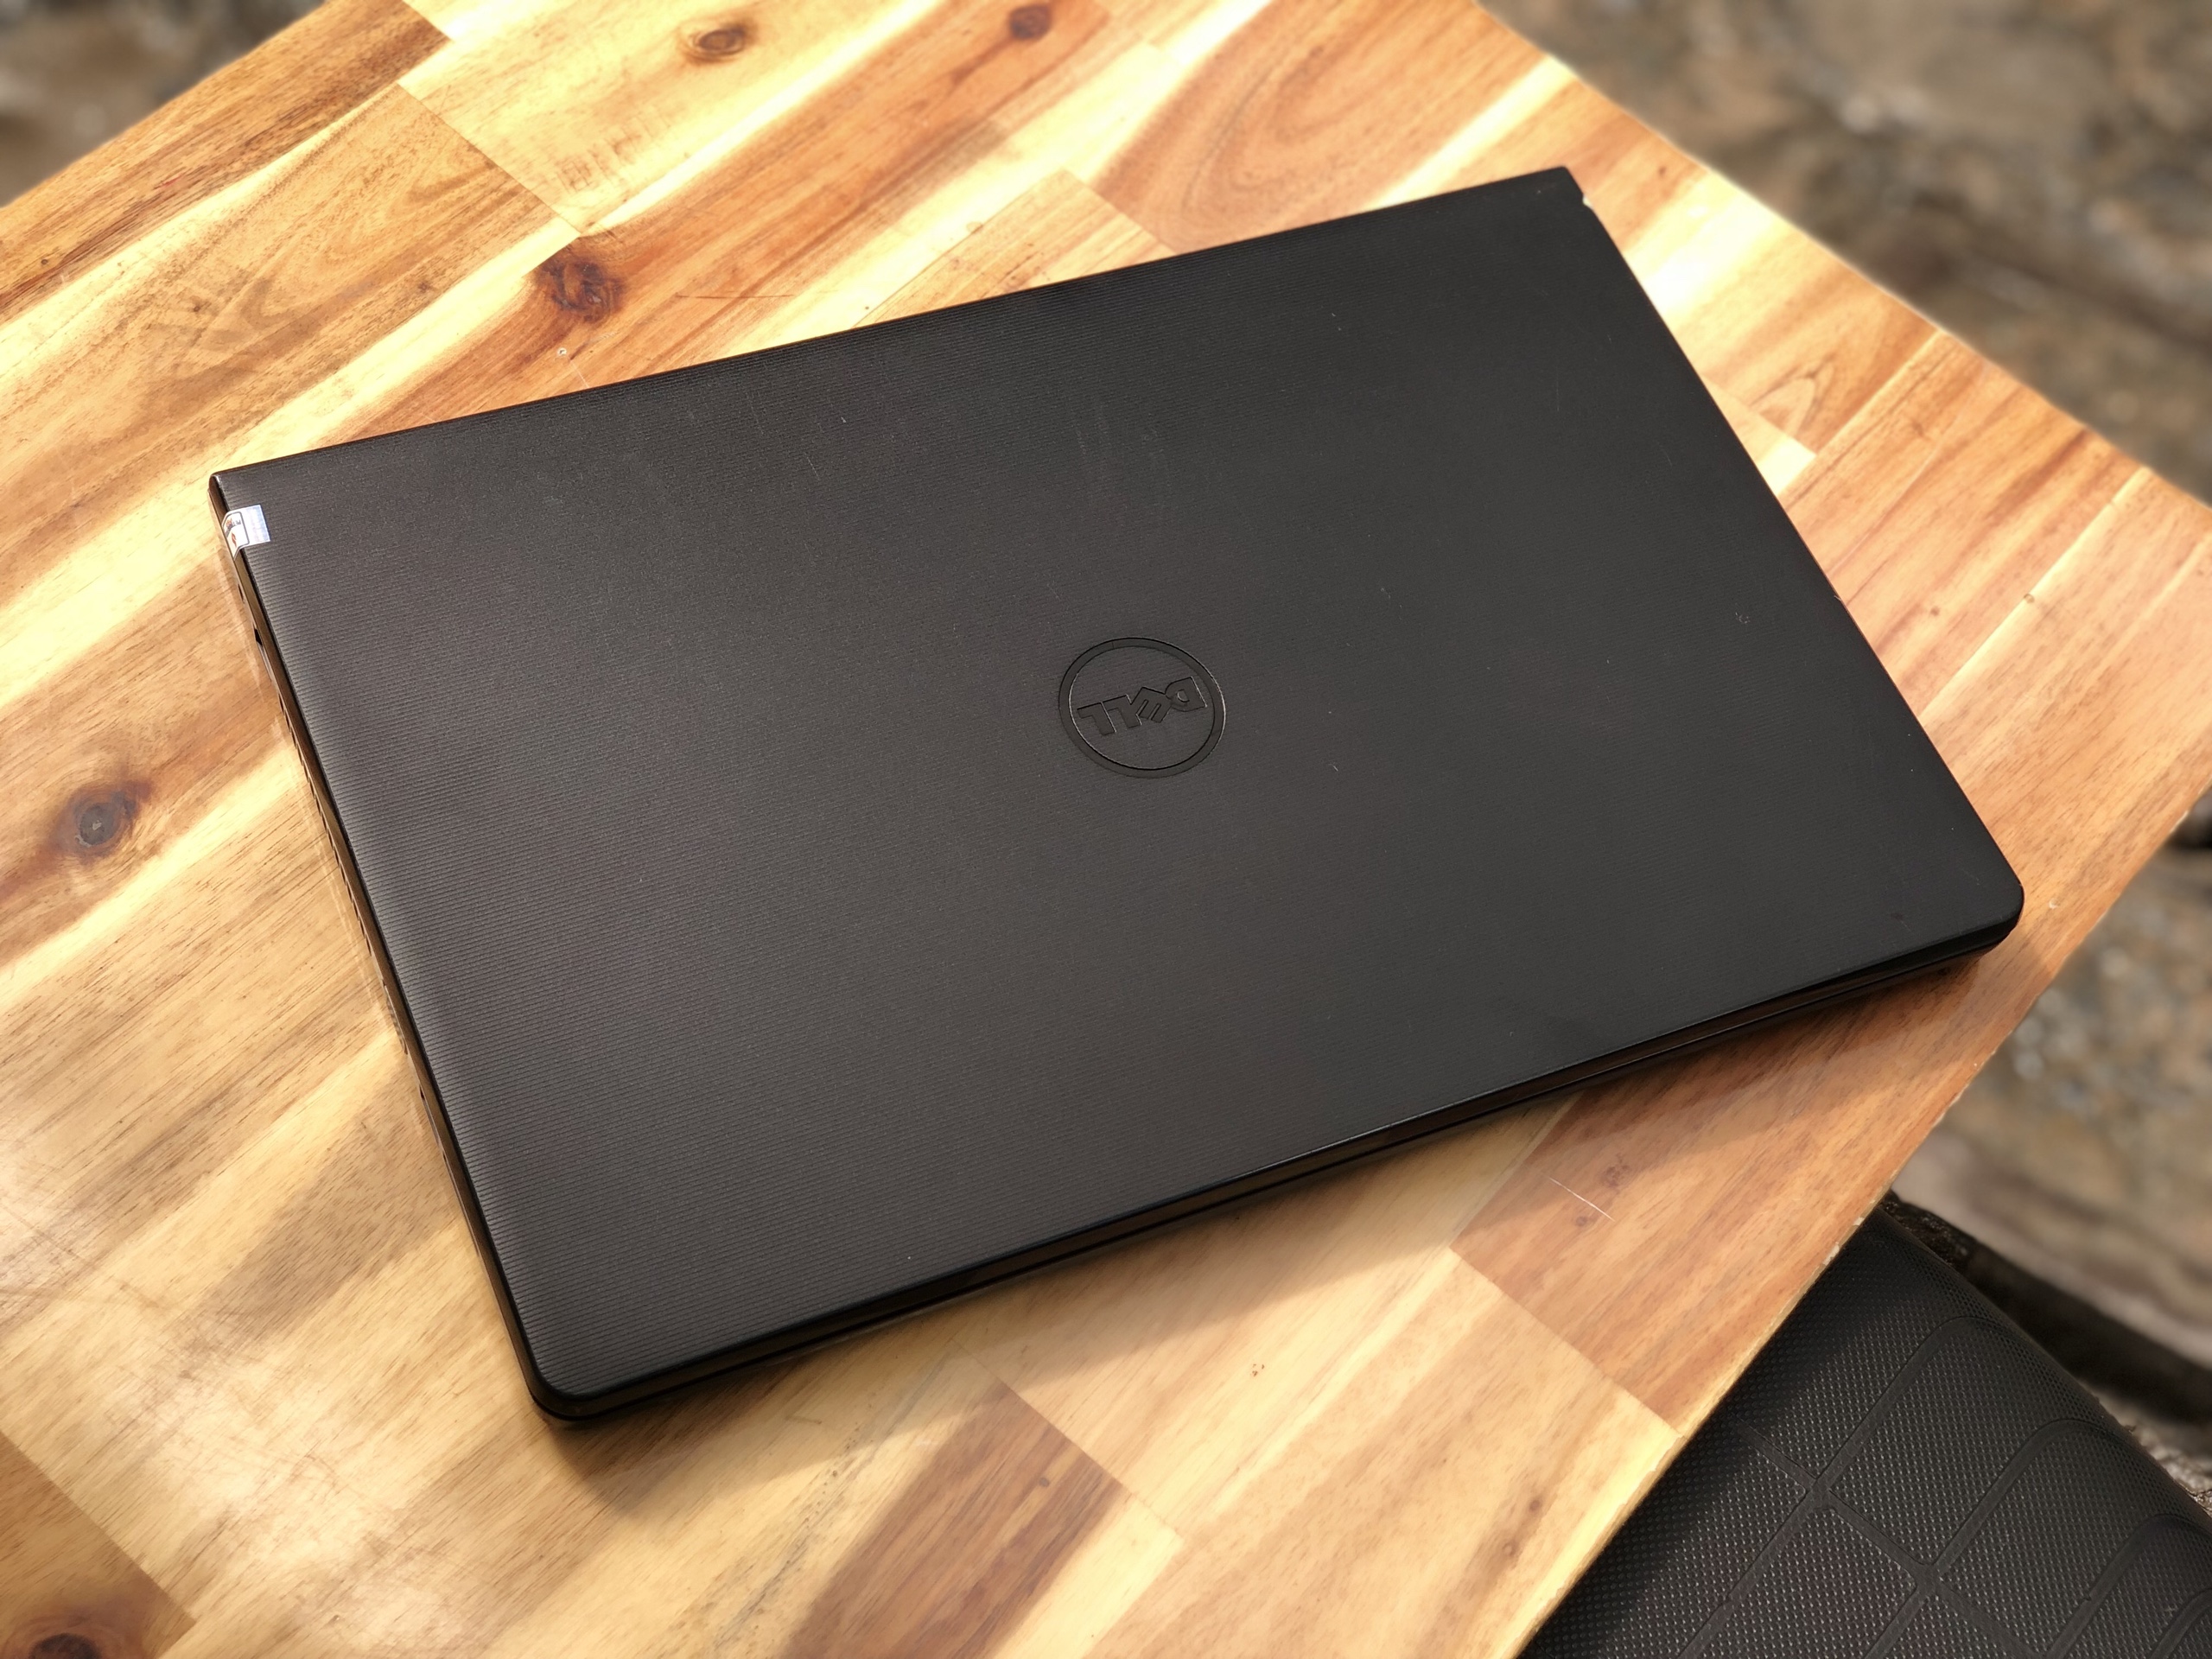 Laptop Dell Vostro 3558/ i5 5250U/ 4G/ SSD128/ 15in/ Win 10/ Giá rẻ3